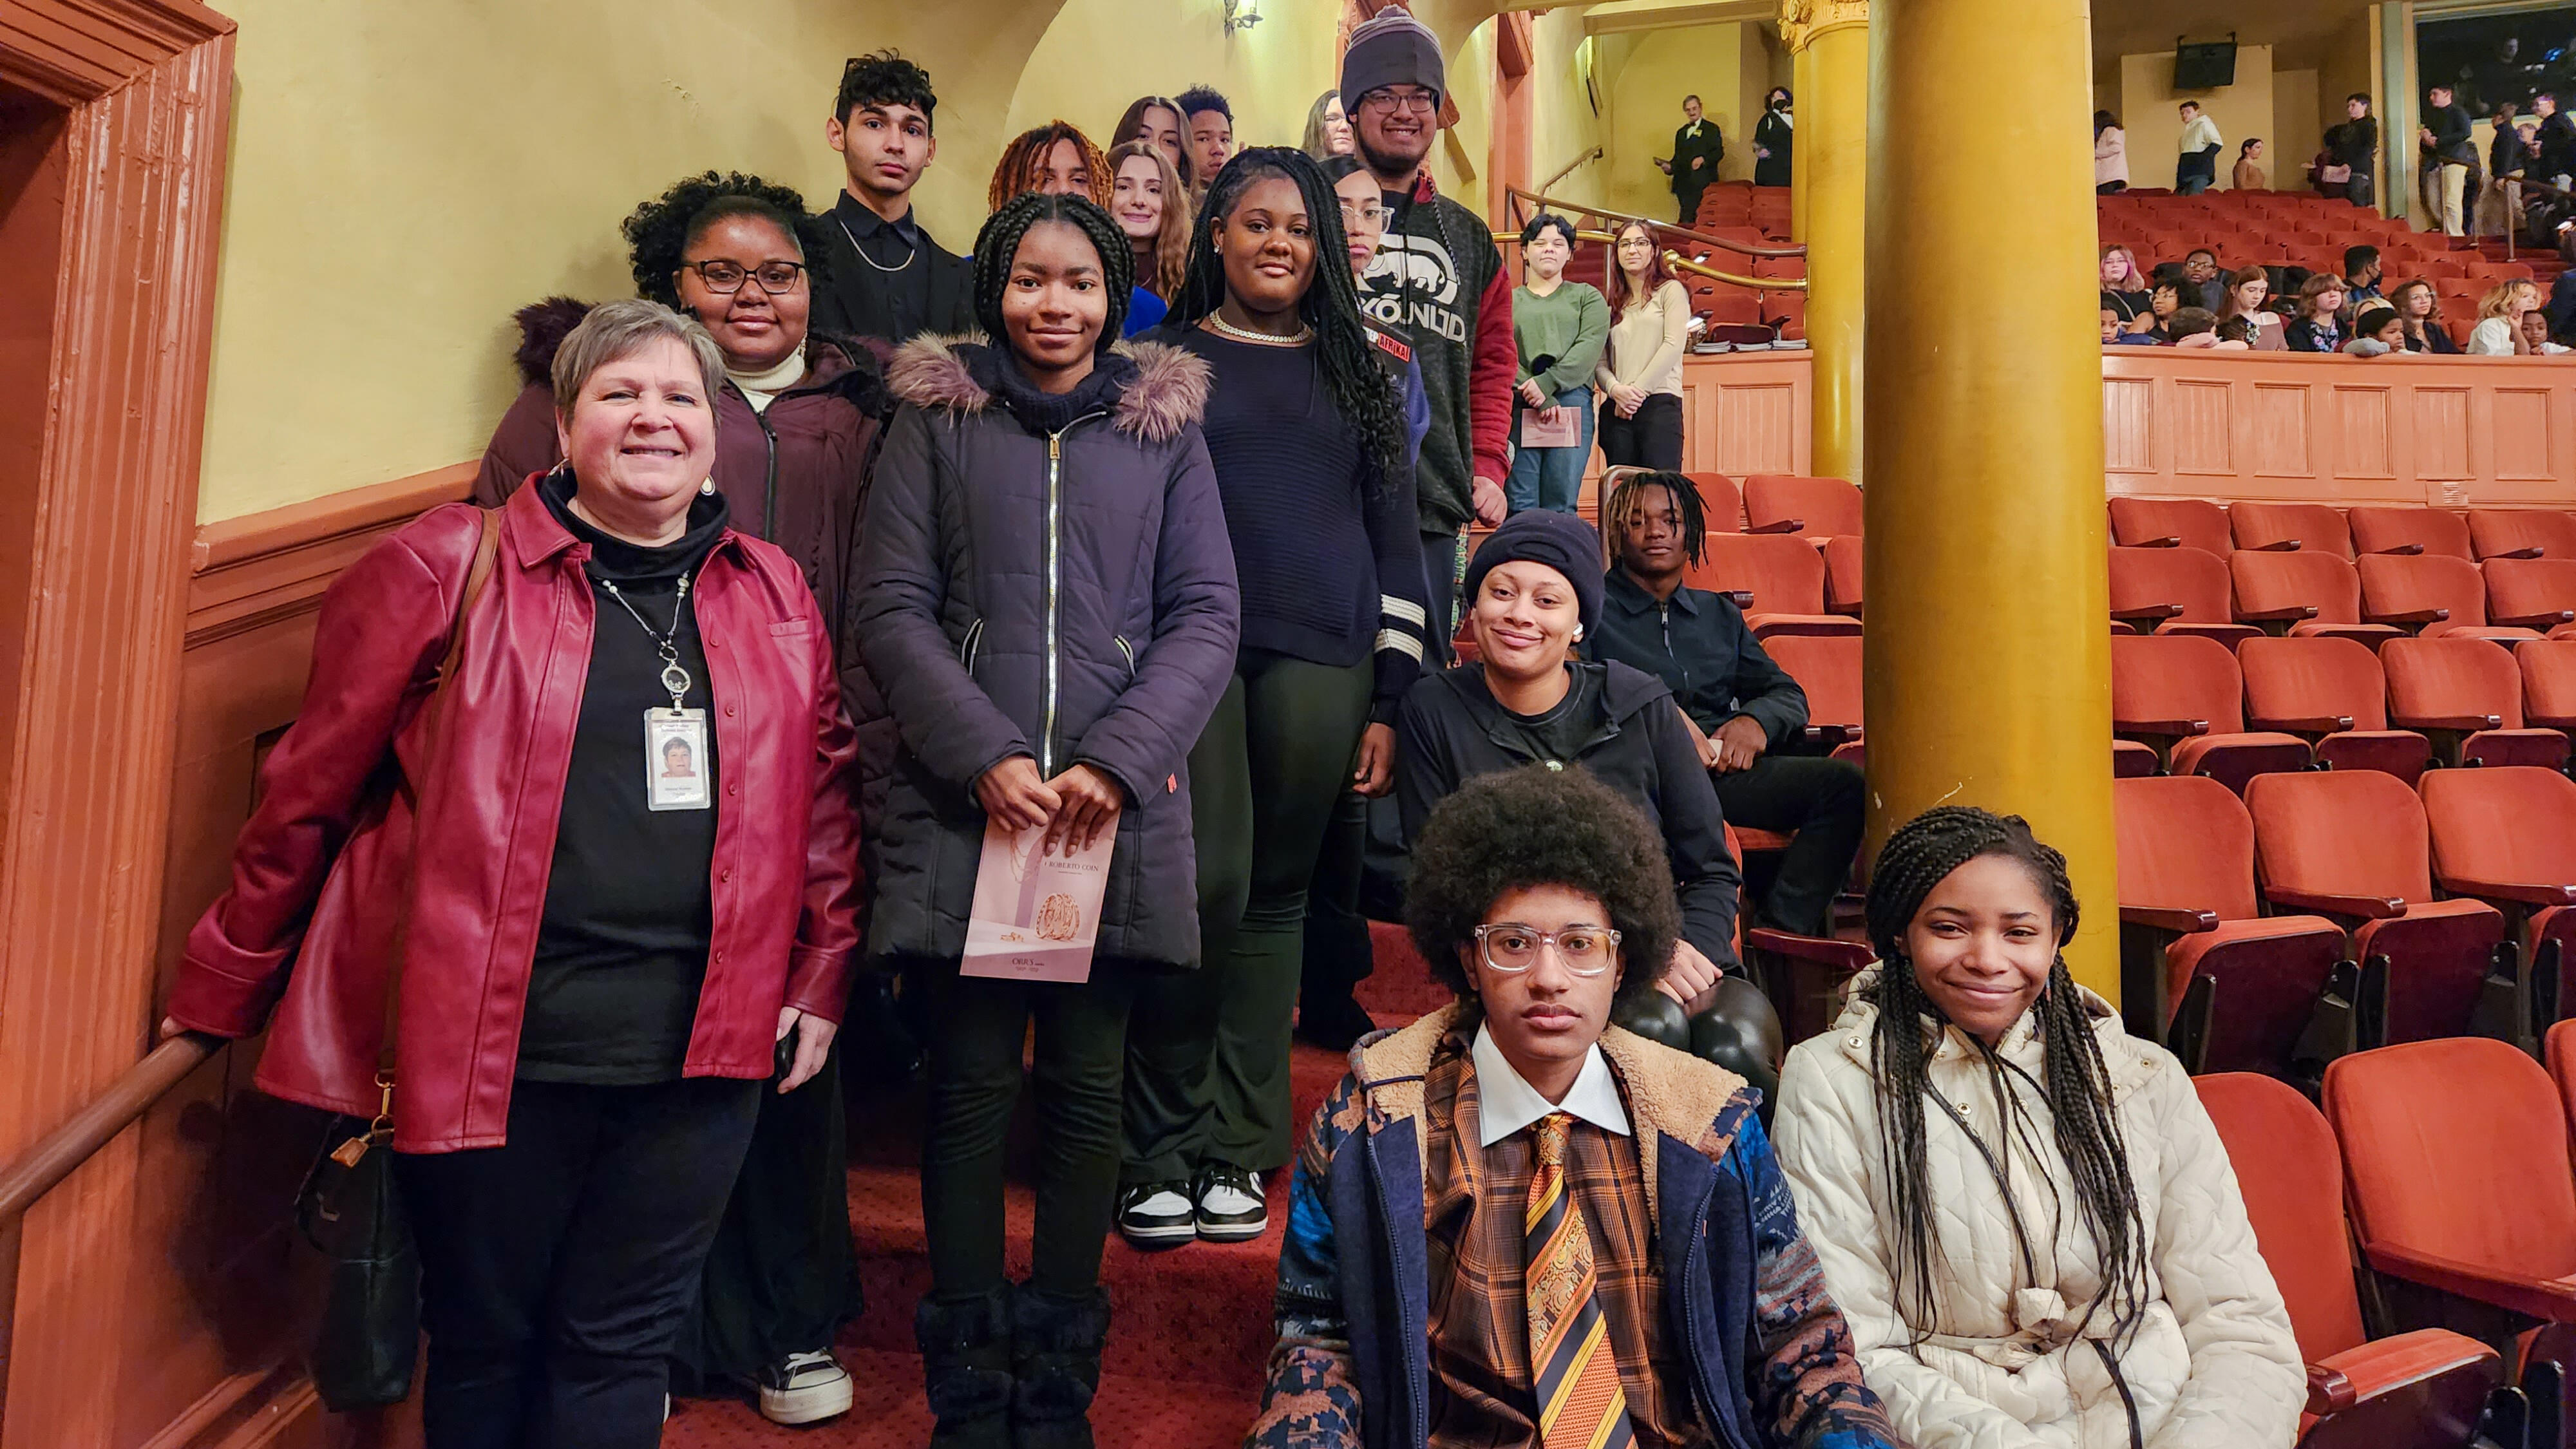 Steel Valley High School students take in the Step Afrika performance at the Byham Theater